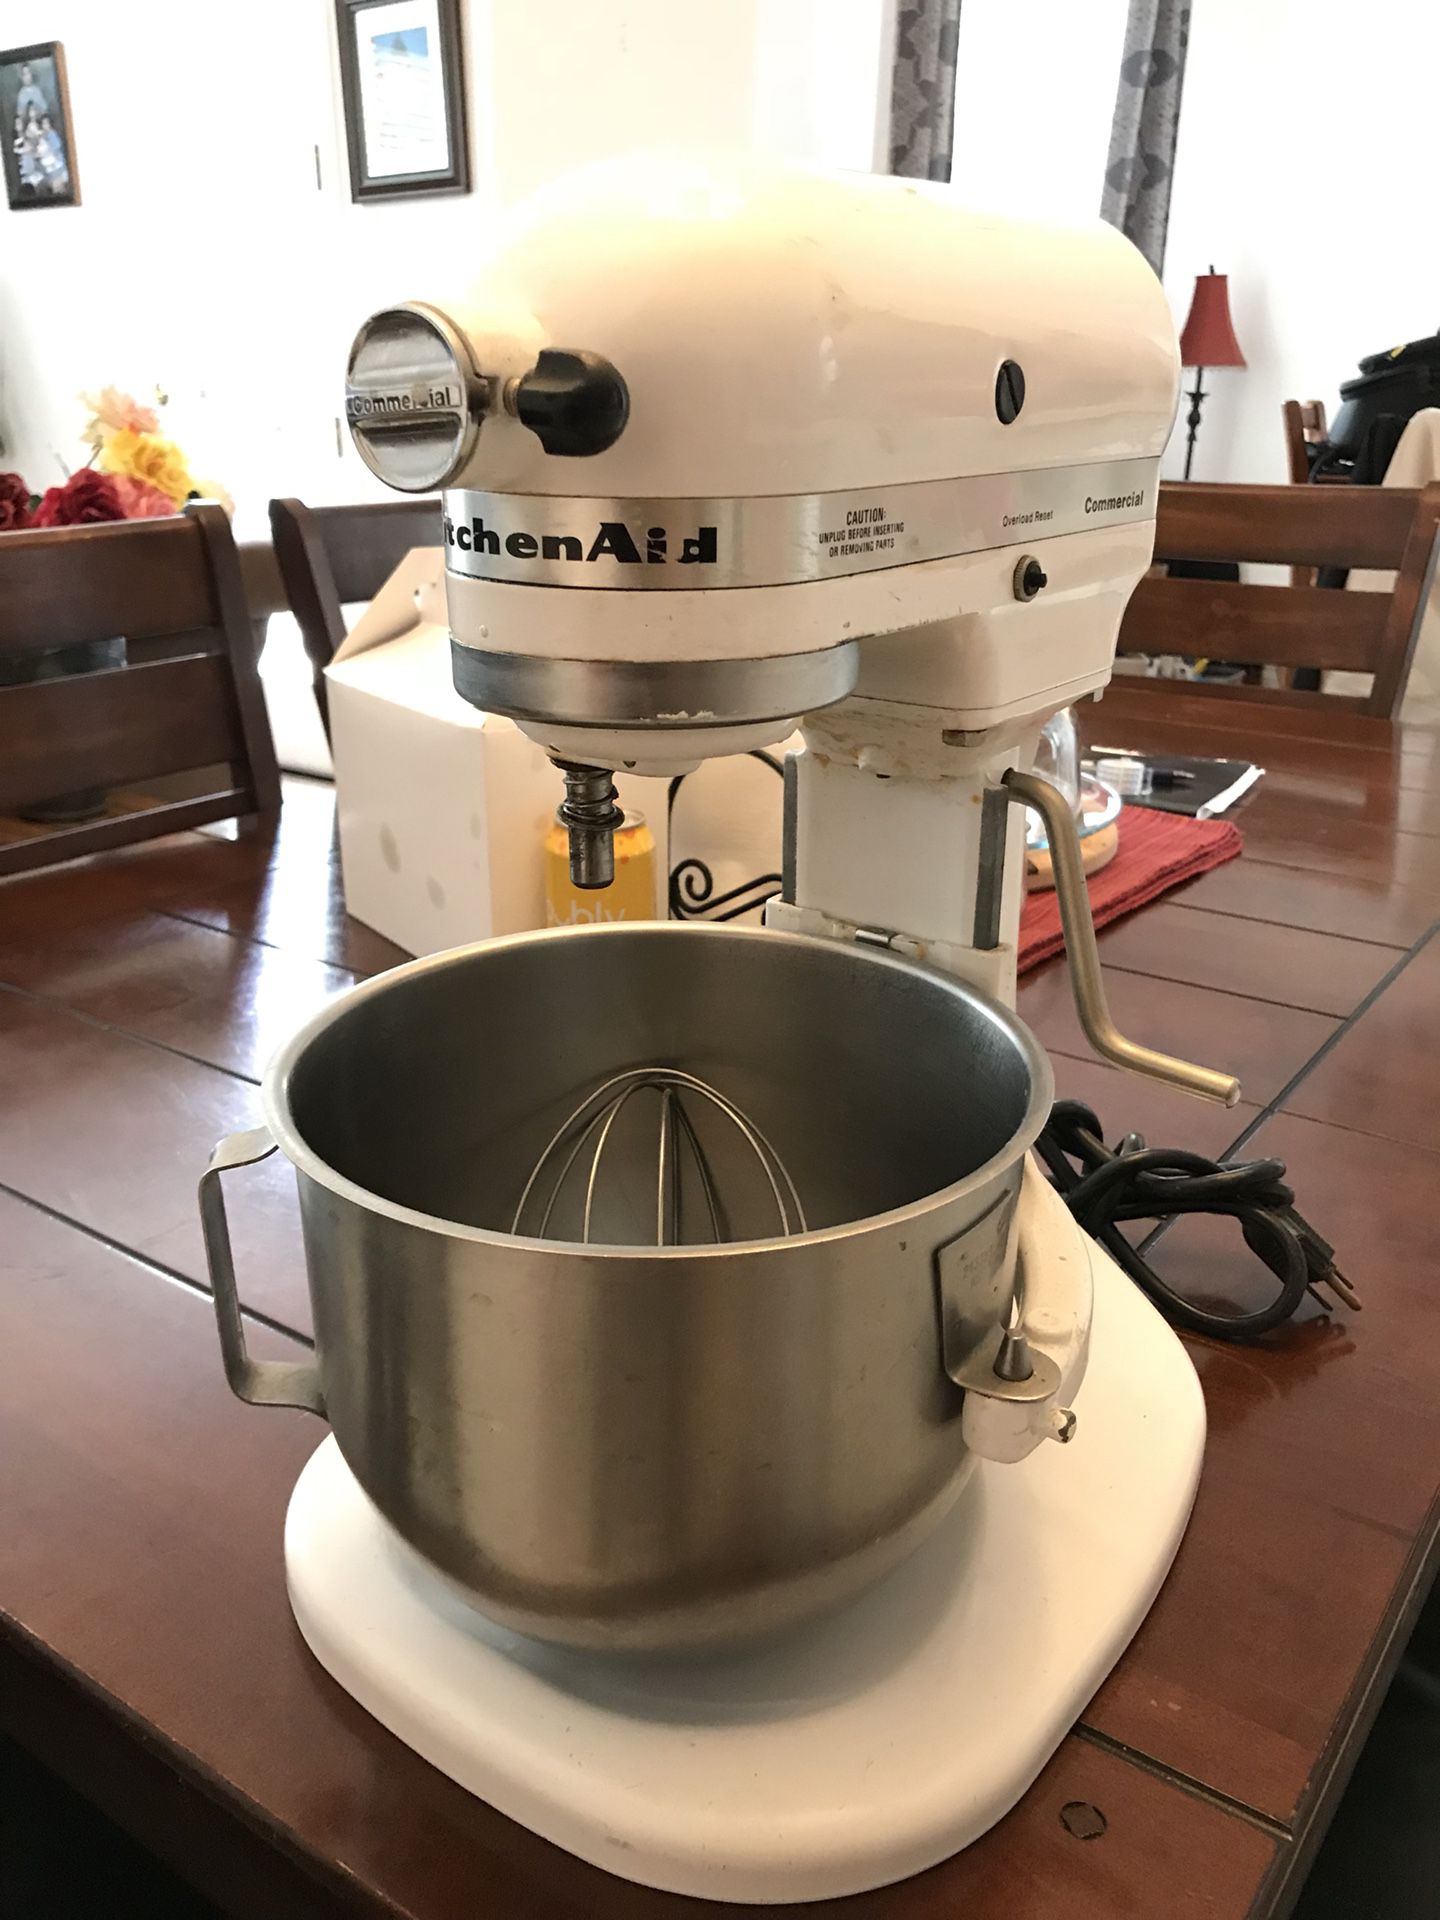 Kitchenaid Commercial 5 quart Stand Mixer KSMC50S with Bowl and